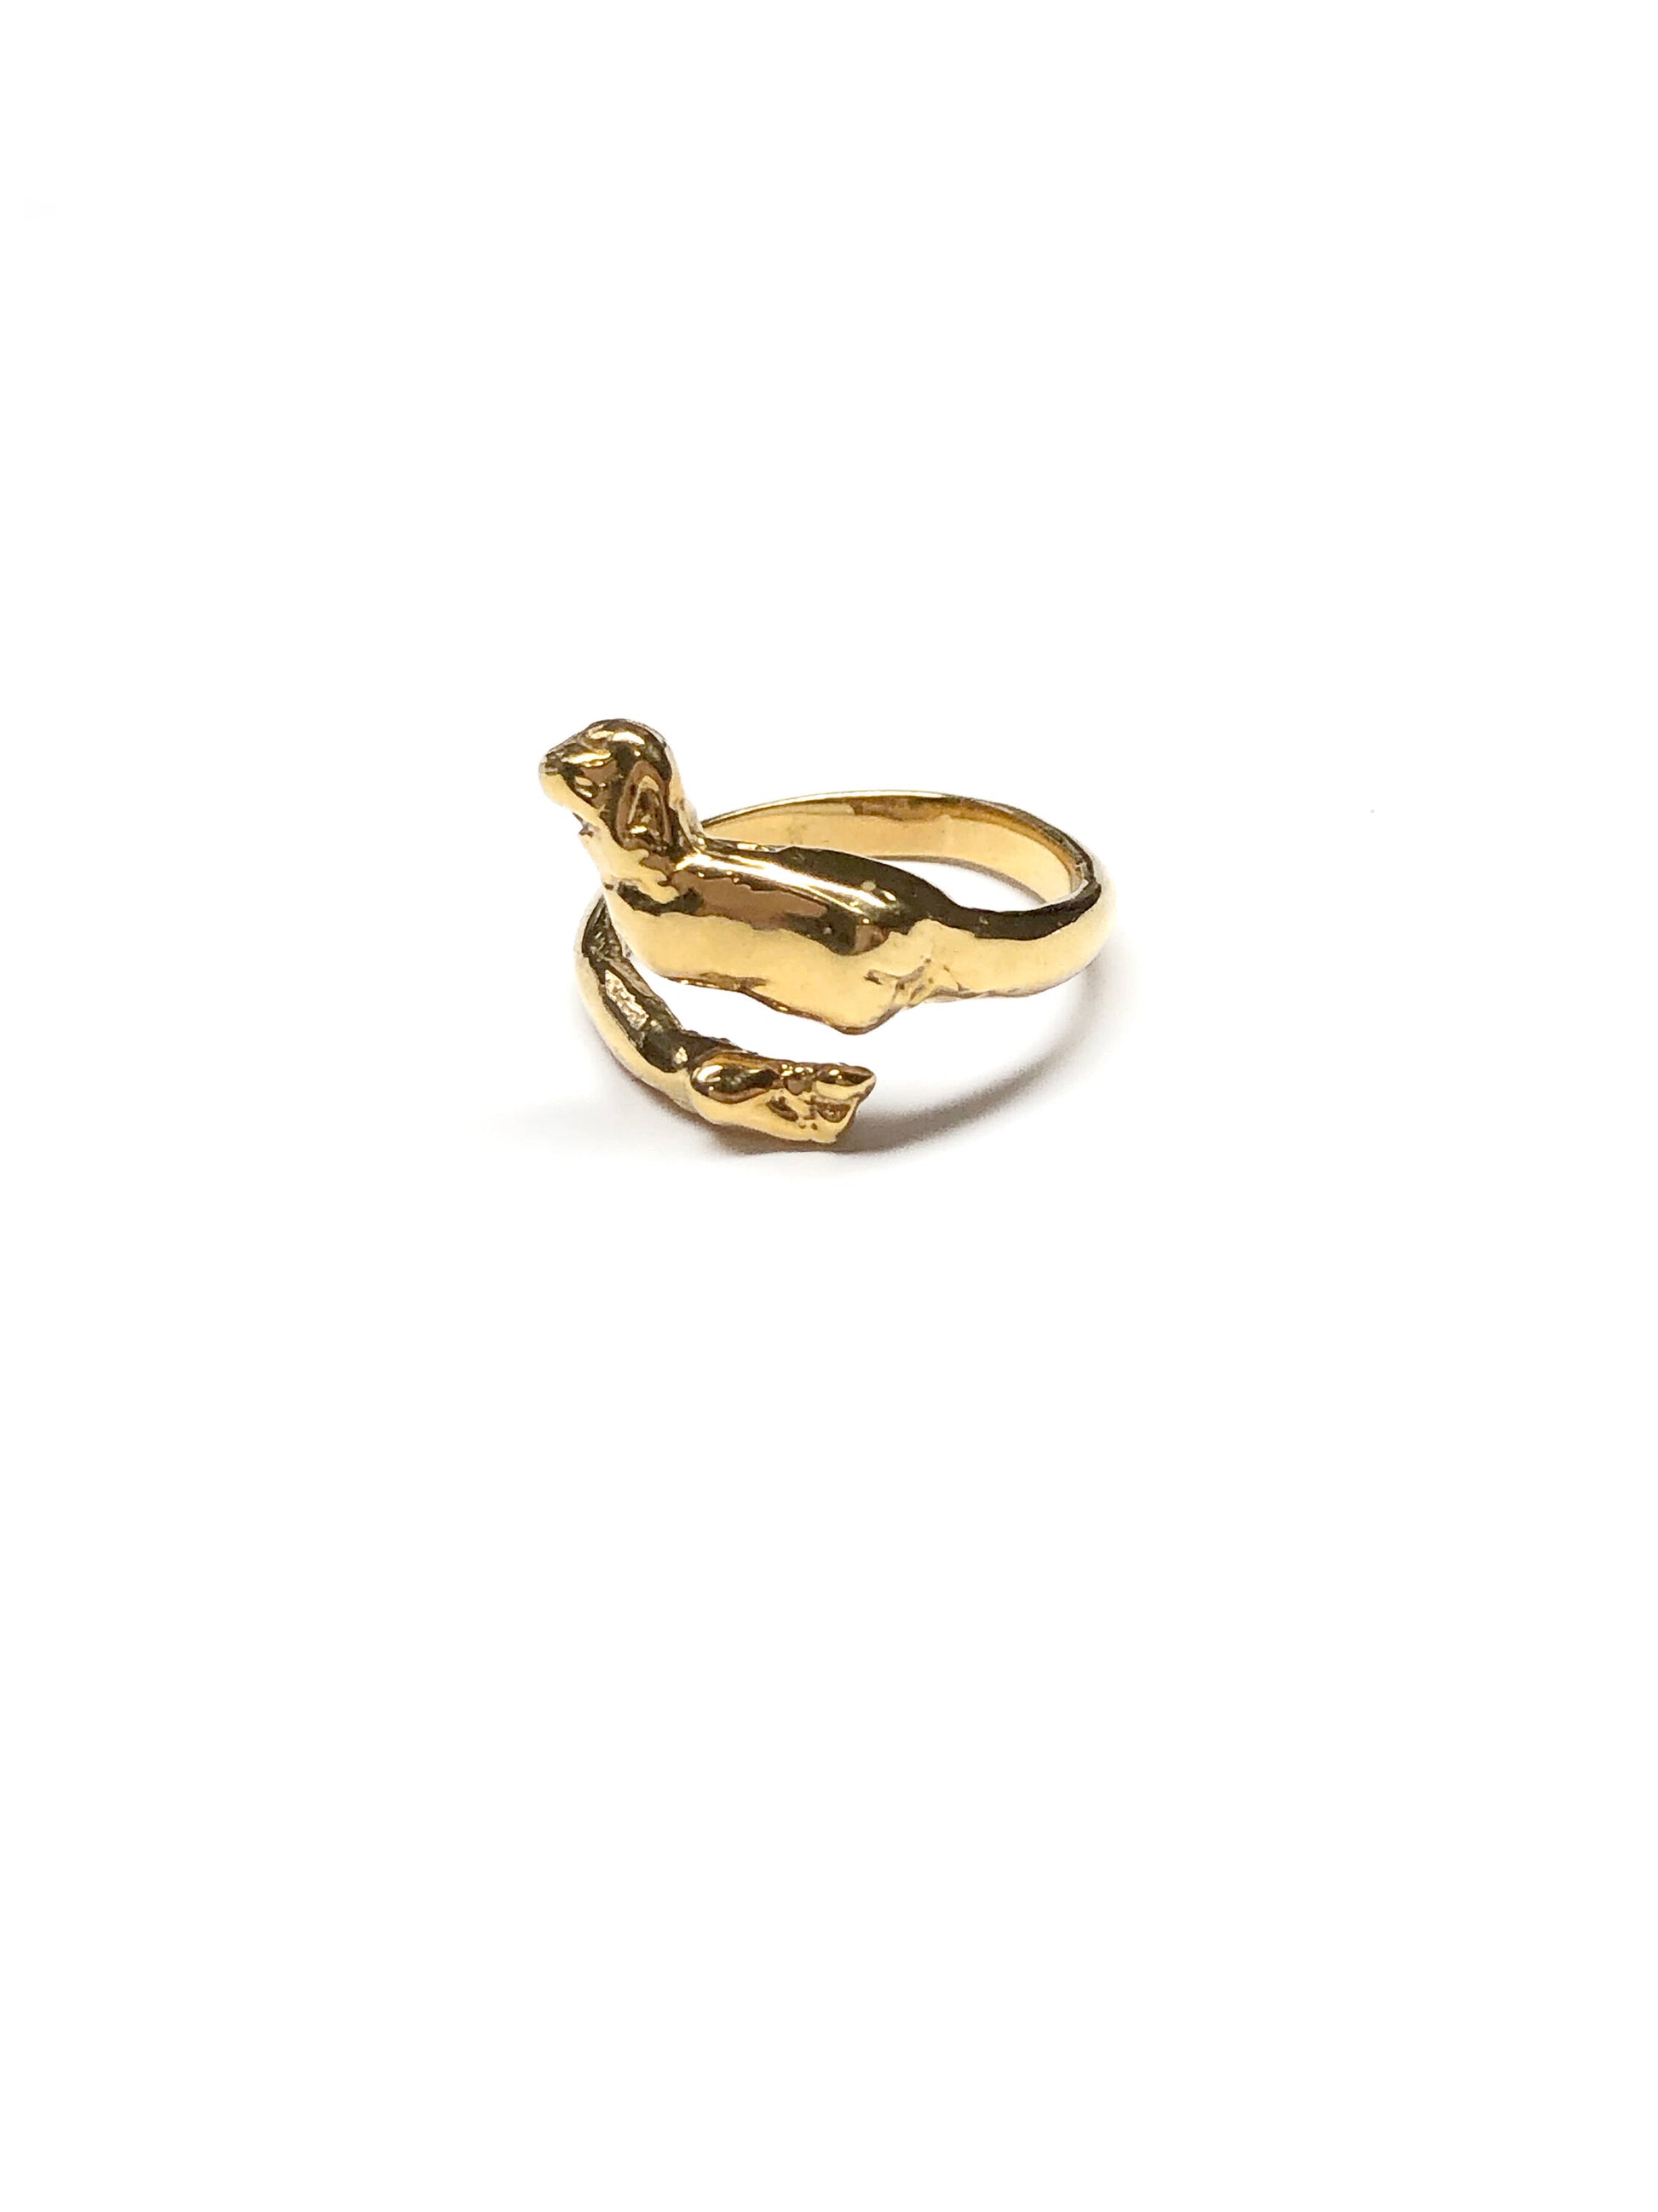 Product photo of 18K Gold Vermeil Cupid Ring by CLARK photographed on white ground. Gold band is a cheeky personification of cupid. The top, a wing in flight with a little butt and the bottom a small foot. Flexible band allows for the ring to be adjustable. 